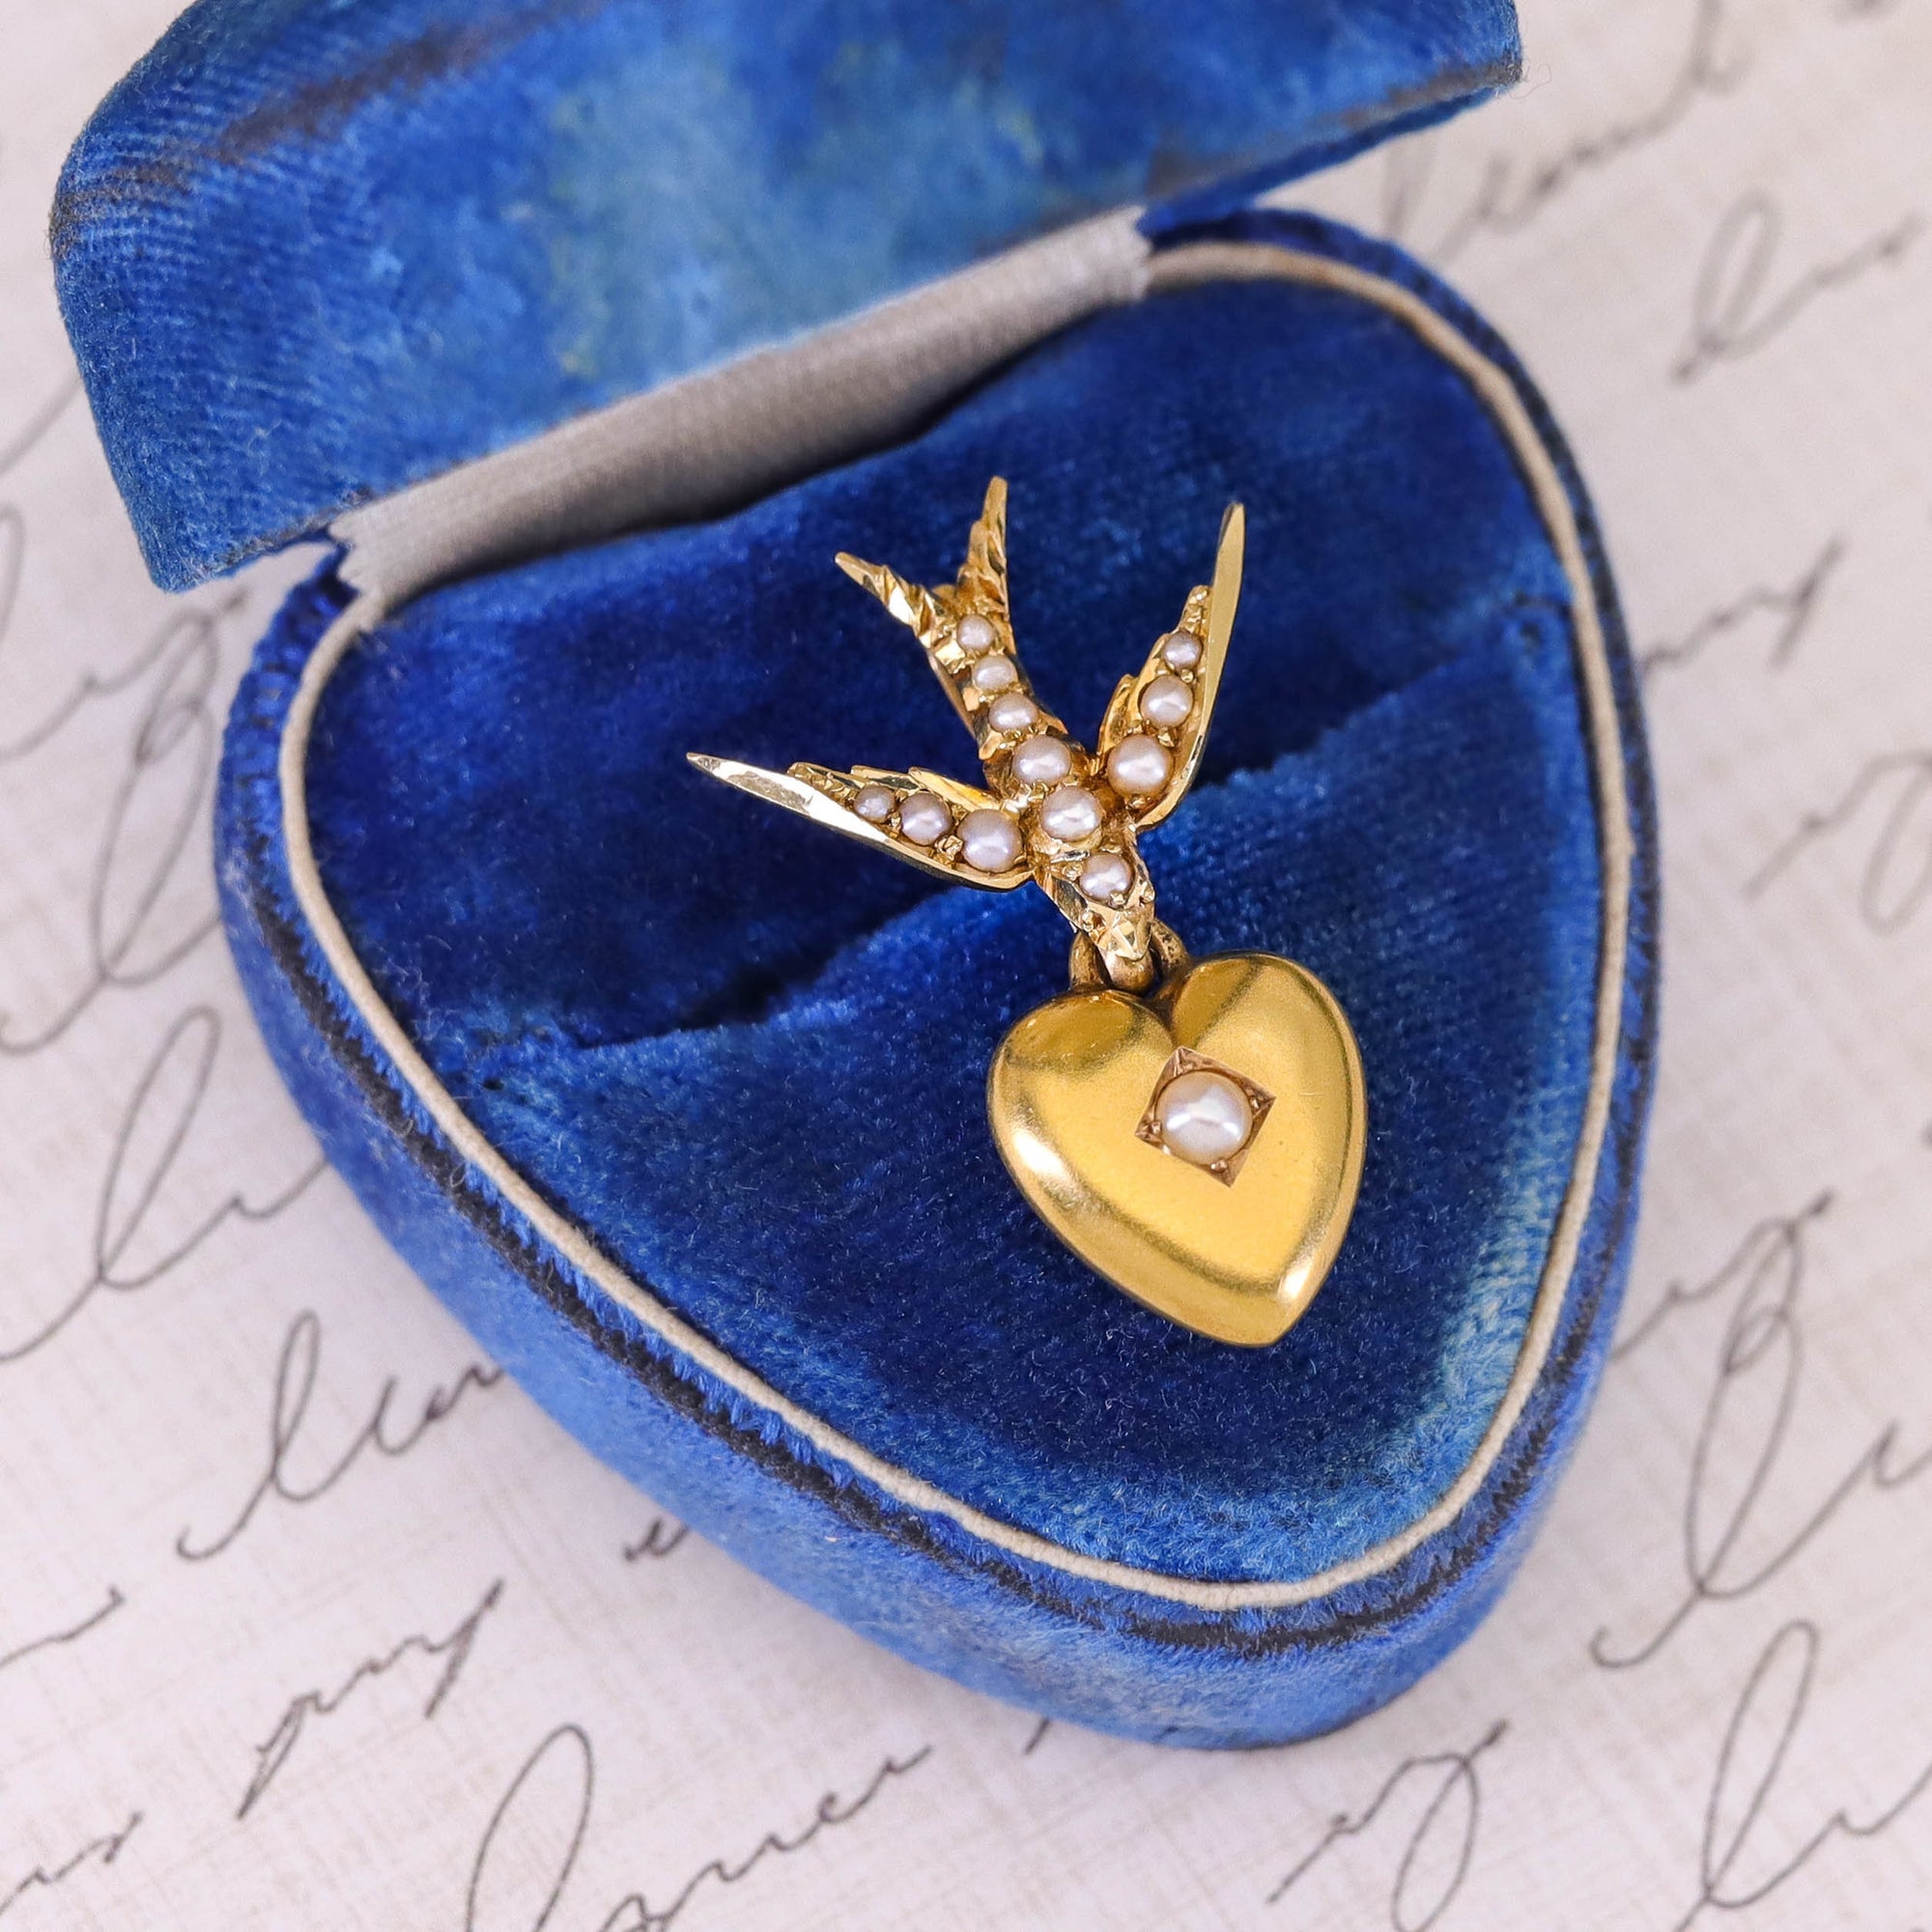 Antique Pearl Dove and Heart Pendant of 14k Gold